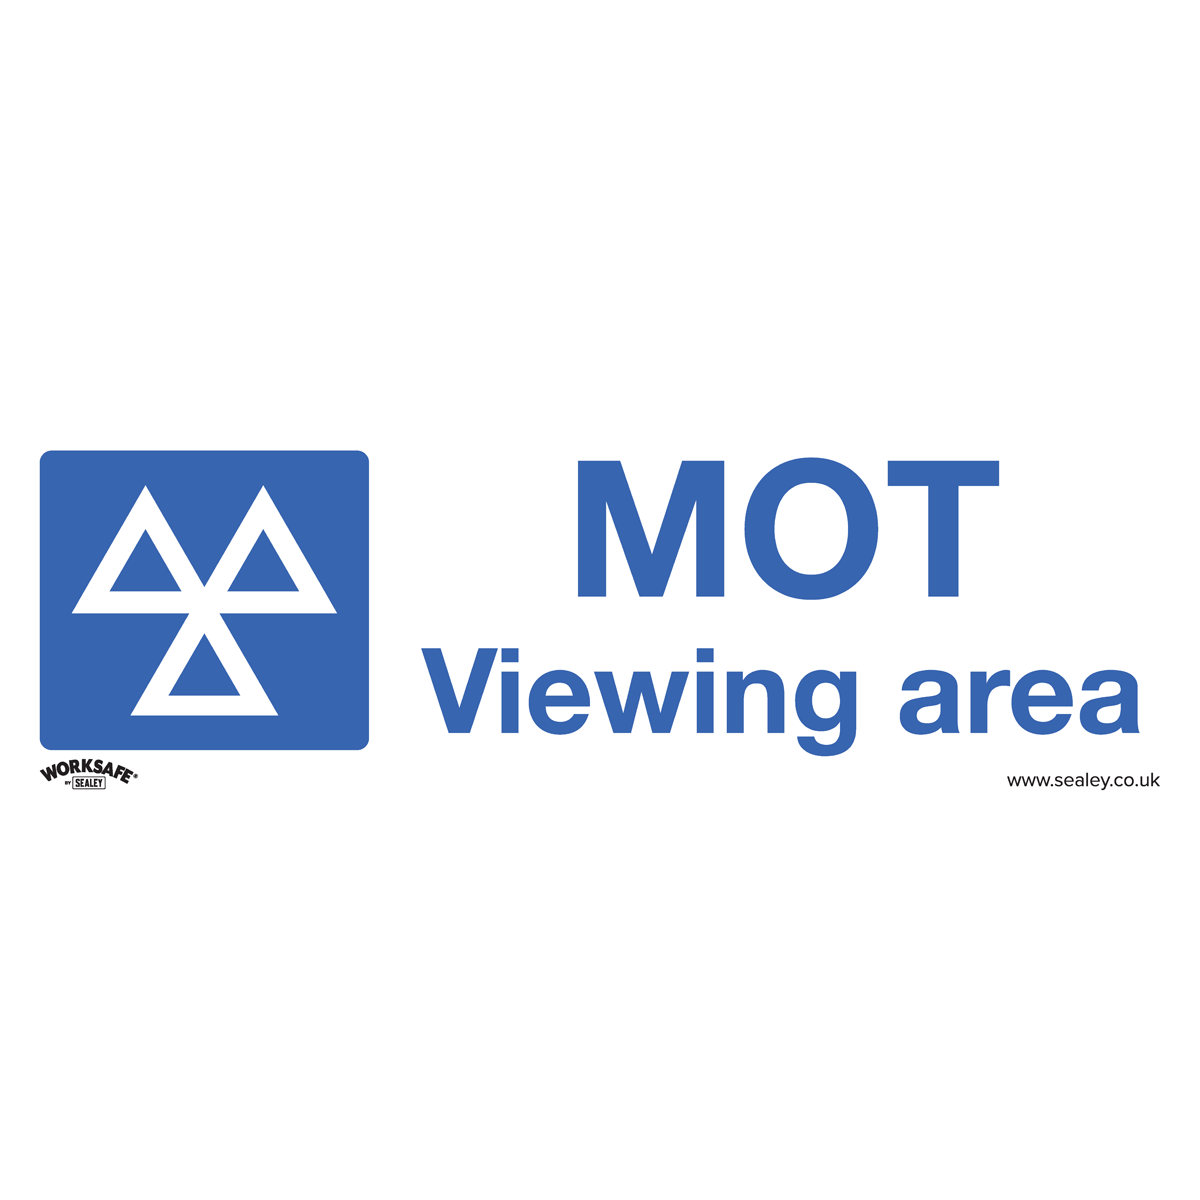 Warning Safety Sign - MOT Viewing Area - Rigid Plastic - SS50P1 - Farming Parts